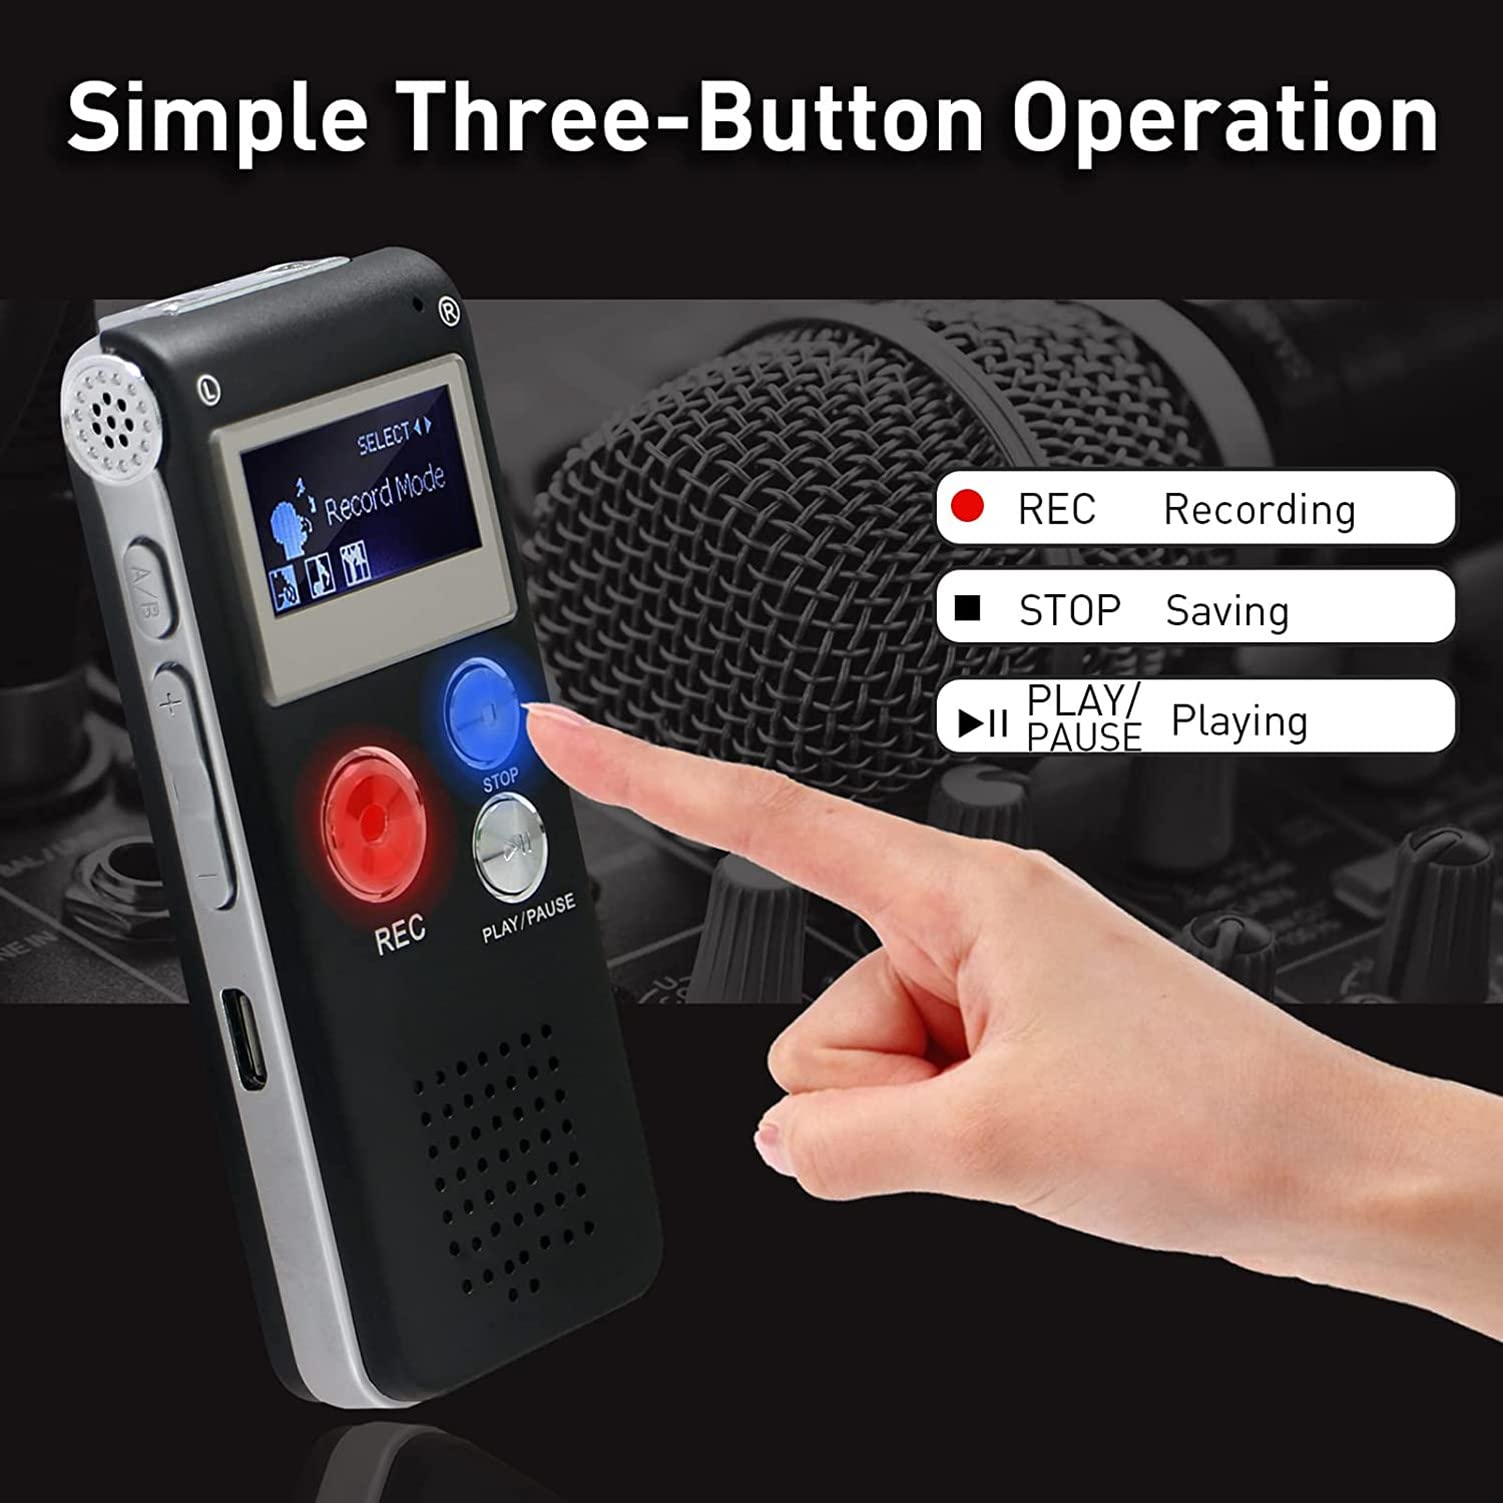 HXTWORLD Digital Voice Recorders 16GB Audio Recorder Voice Activated Recorder for Lectures, Meetings, Interviews Recording Device Tape Recorder with Microphone USB Cable, MP3 Player